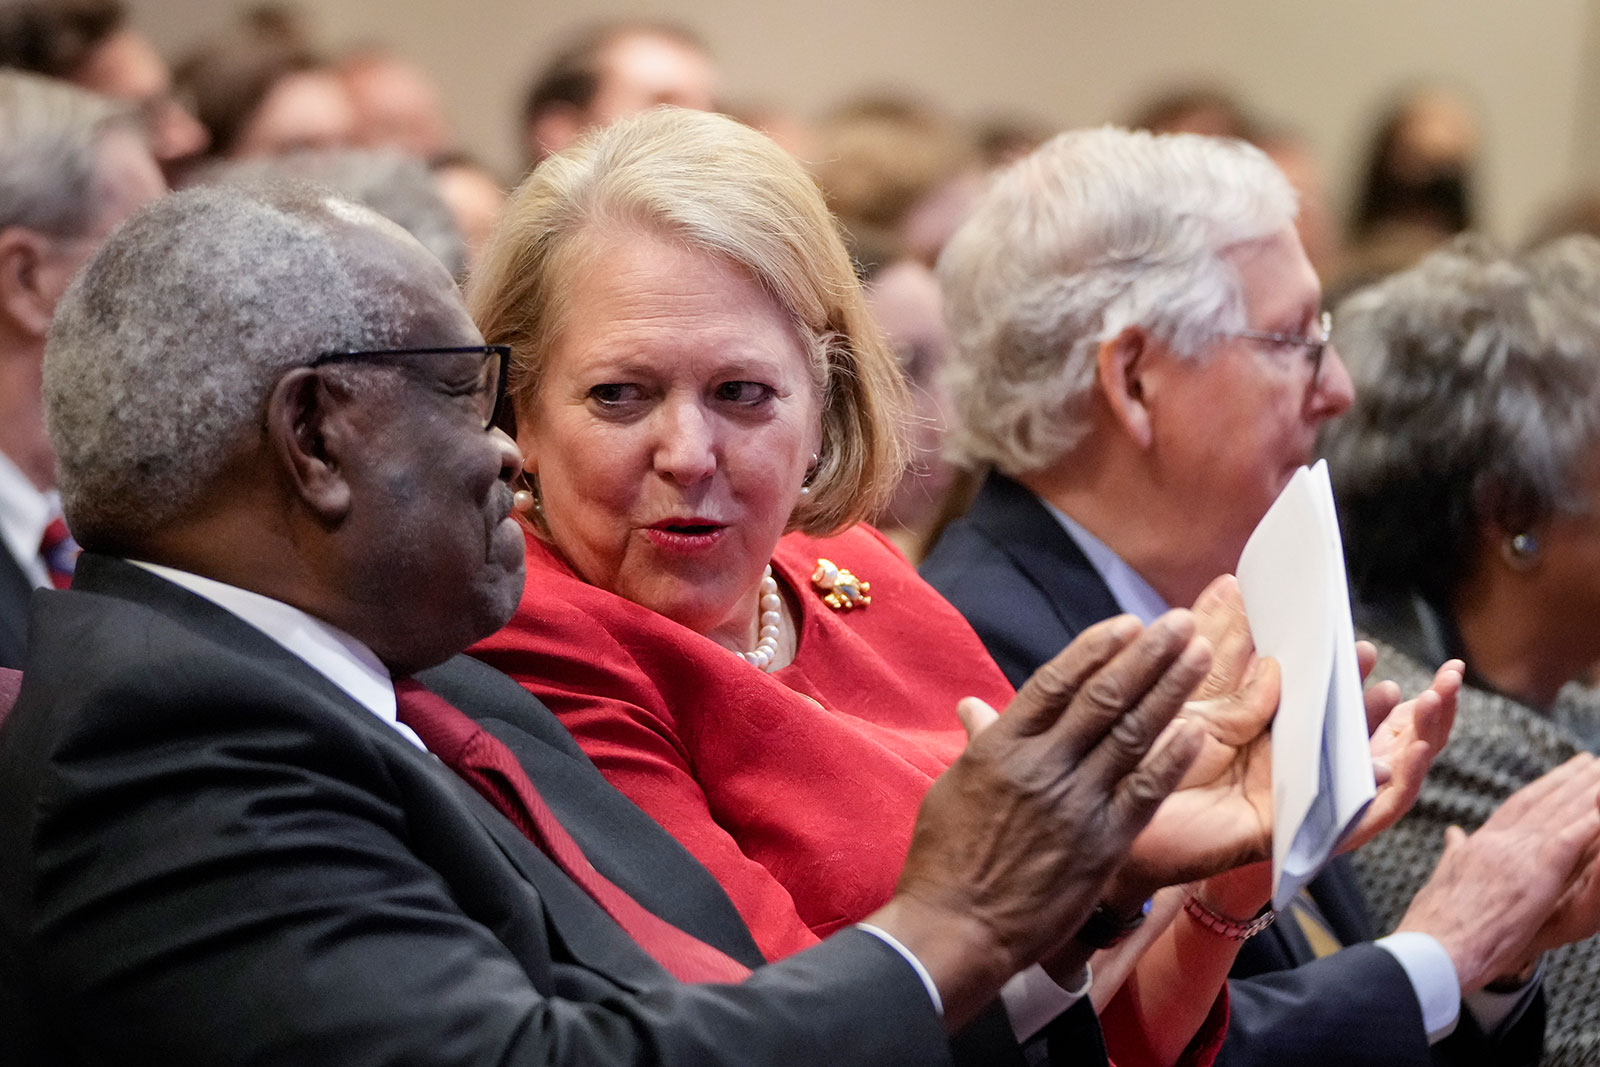 Ginni Thomas, center, sits with her husband Supreme Court Justice Clarence Thomas, left, while he waits to speak at the Heritage Foundation in Washington, DC, in 2021.